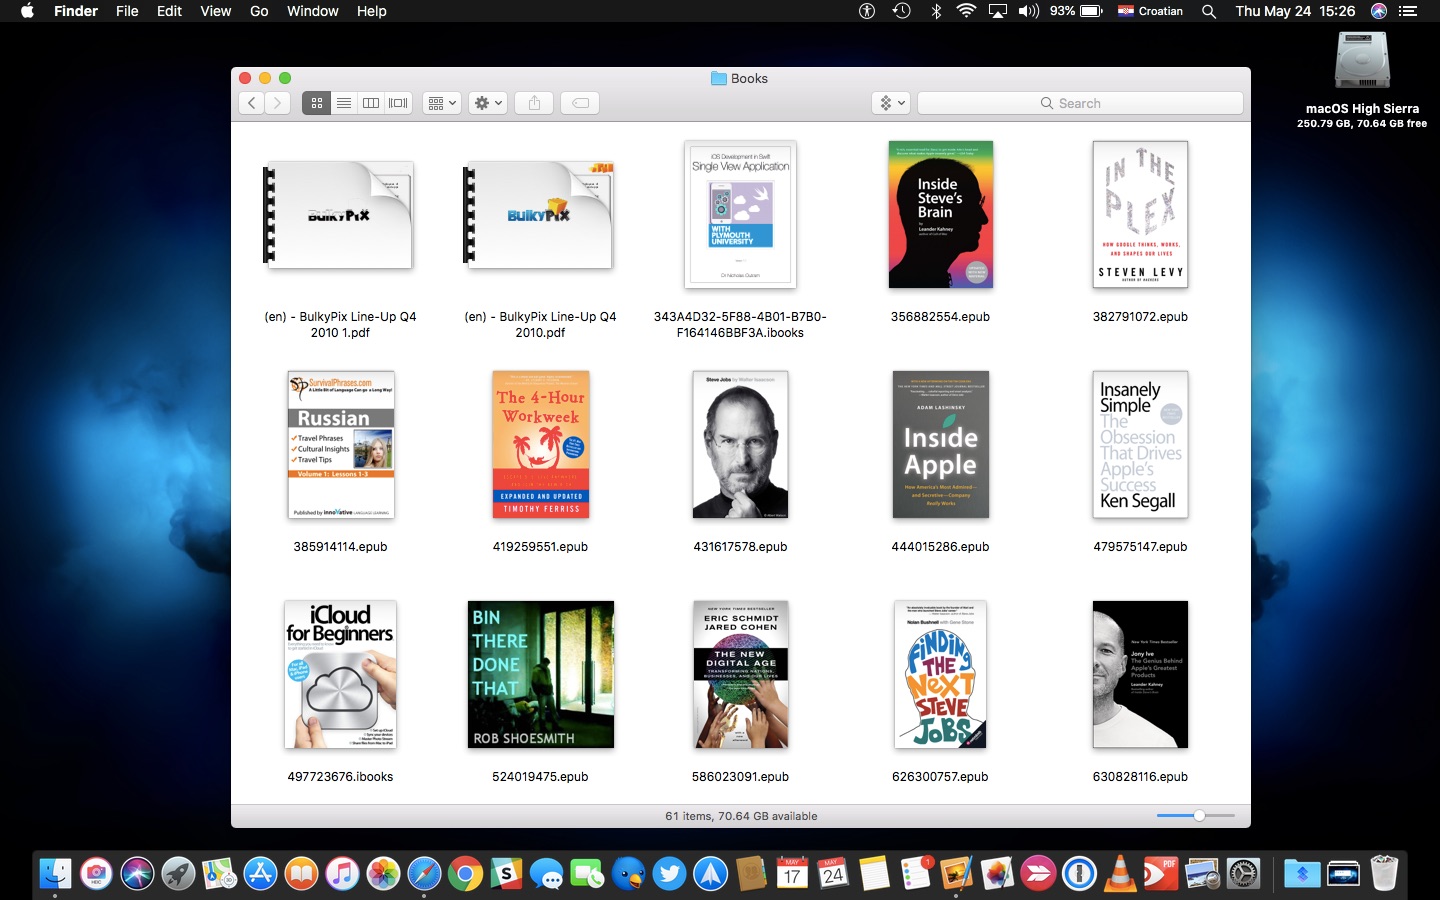 ibooks app for mac showing download icon when no downloads are available